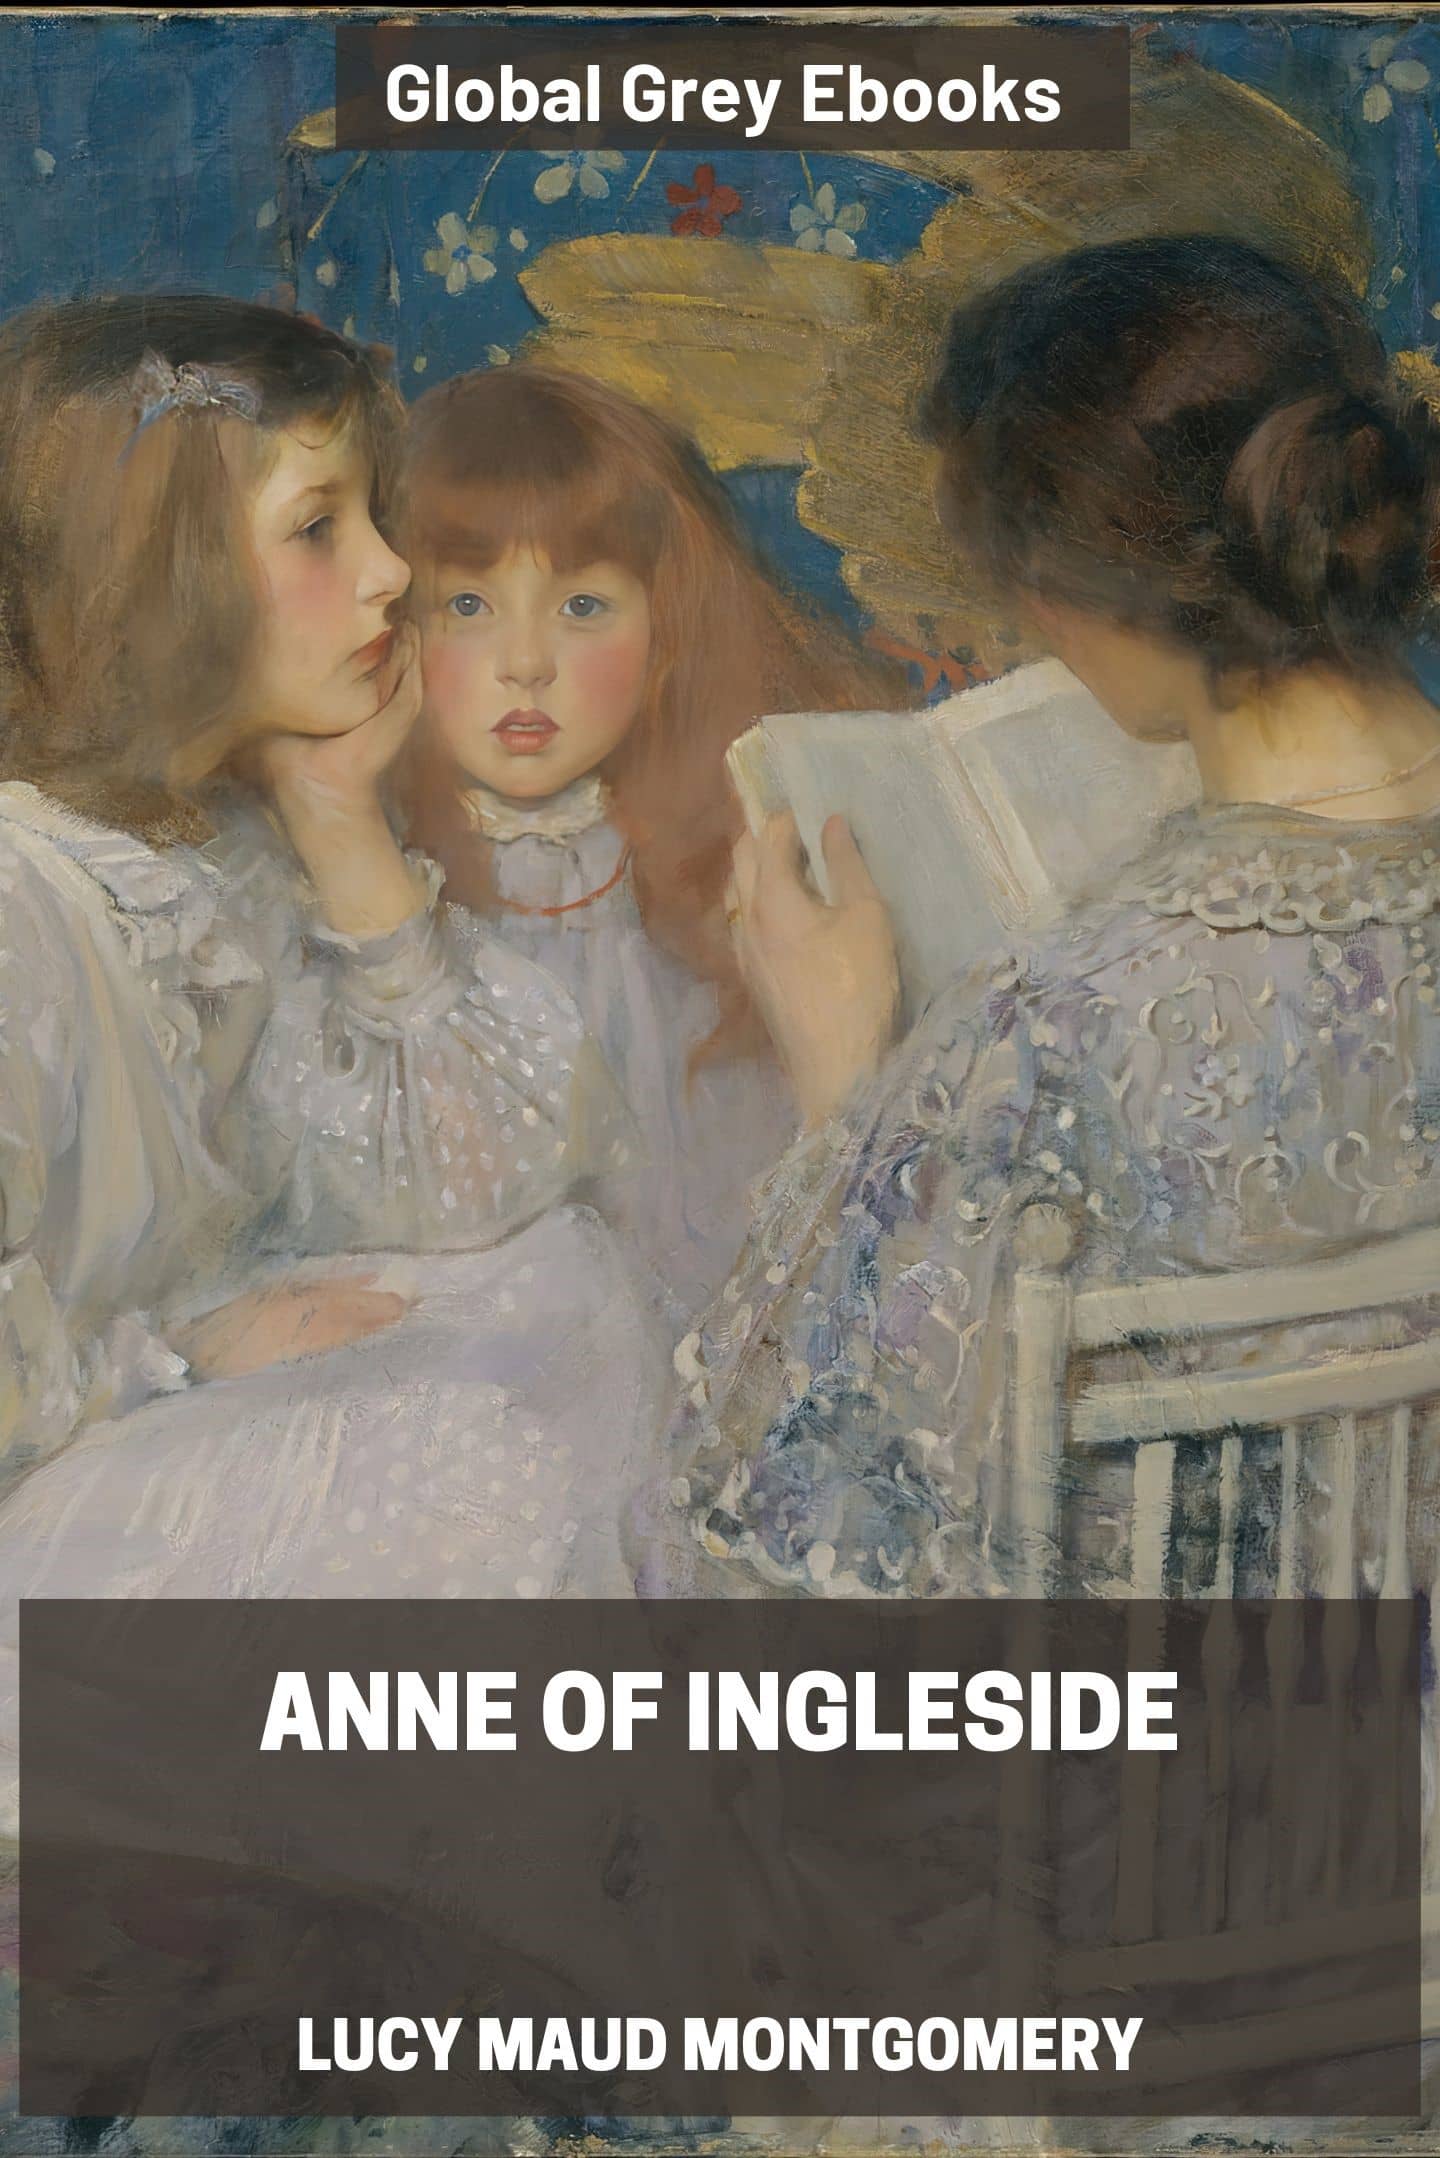 https://www.globalgreyebooks.com/content/book-covers/lucy-maud-montgomery_anne-of-ingleside-large.jpg